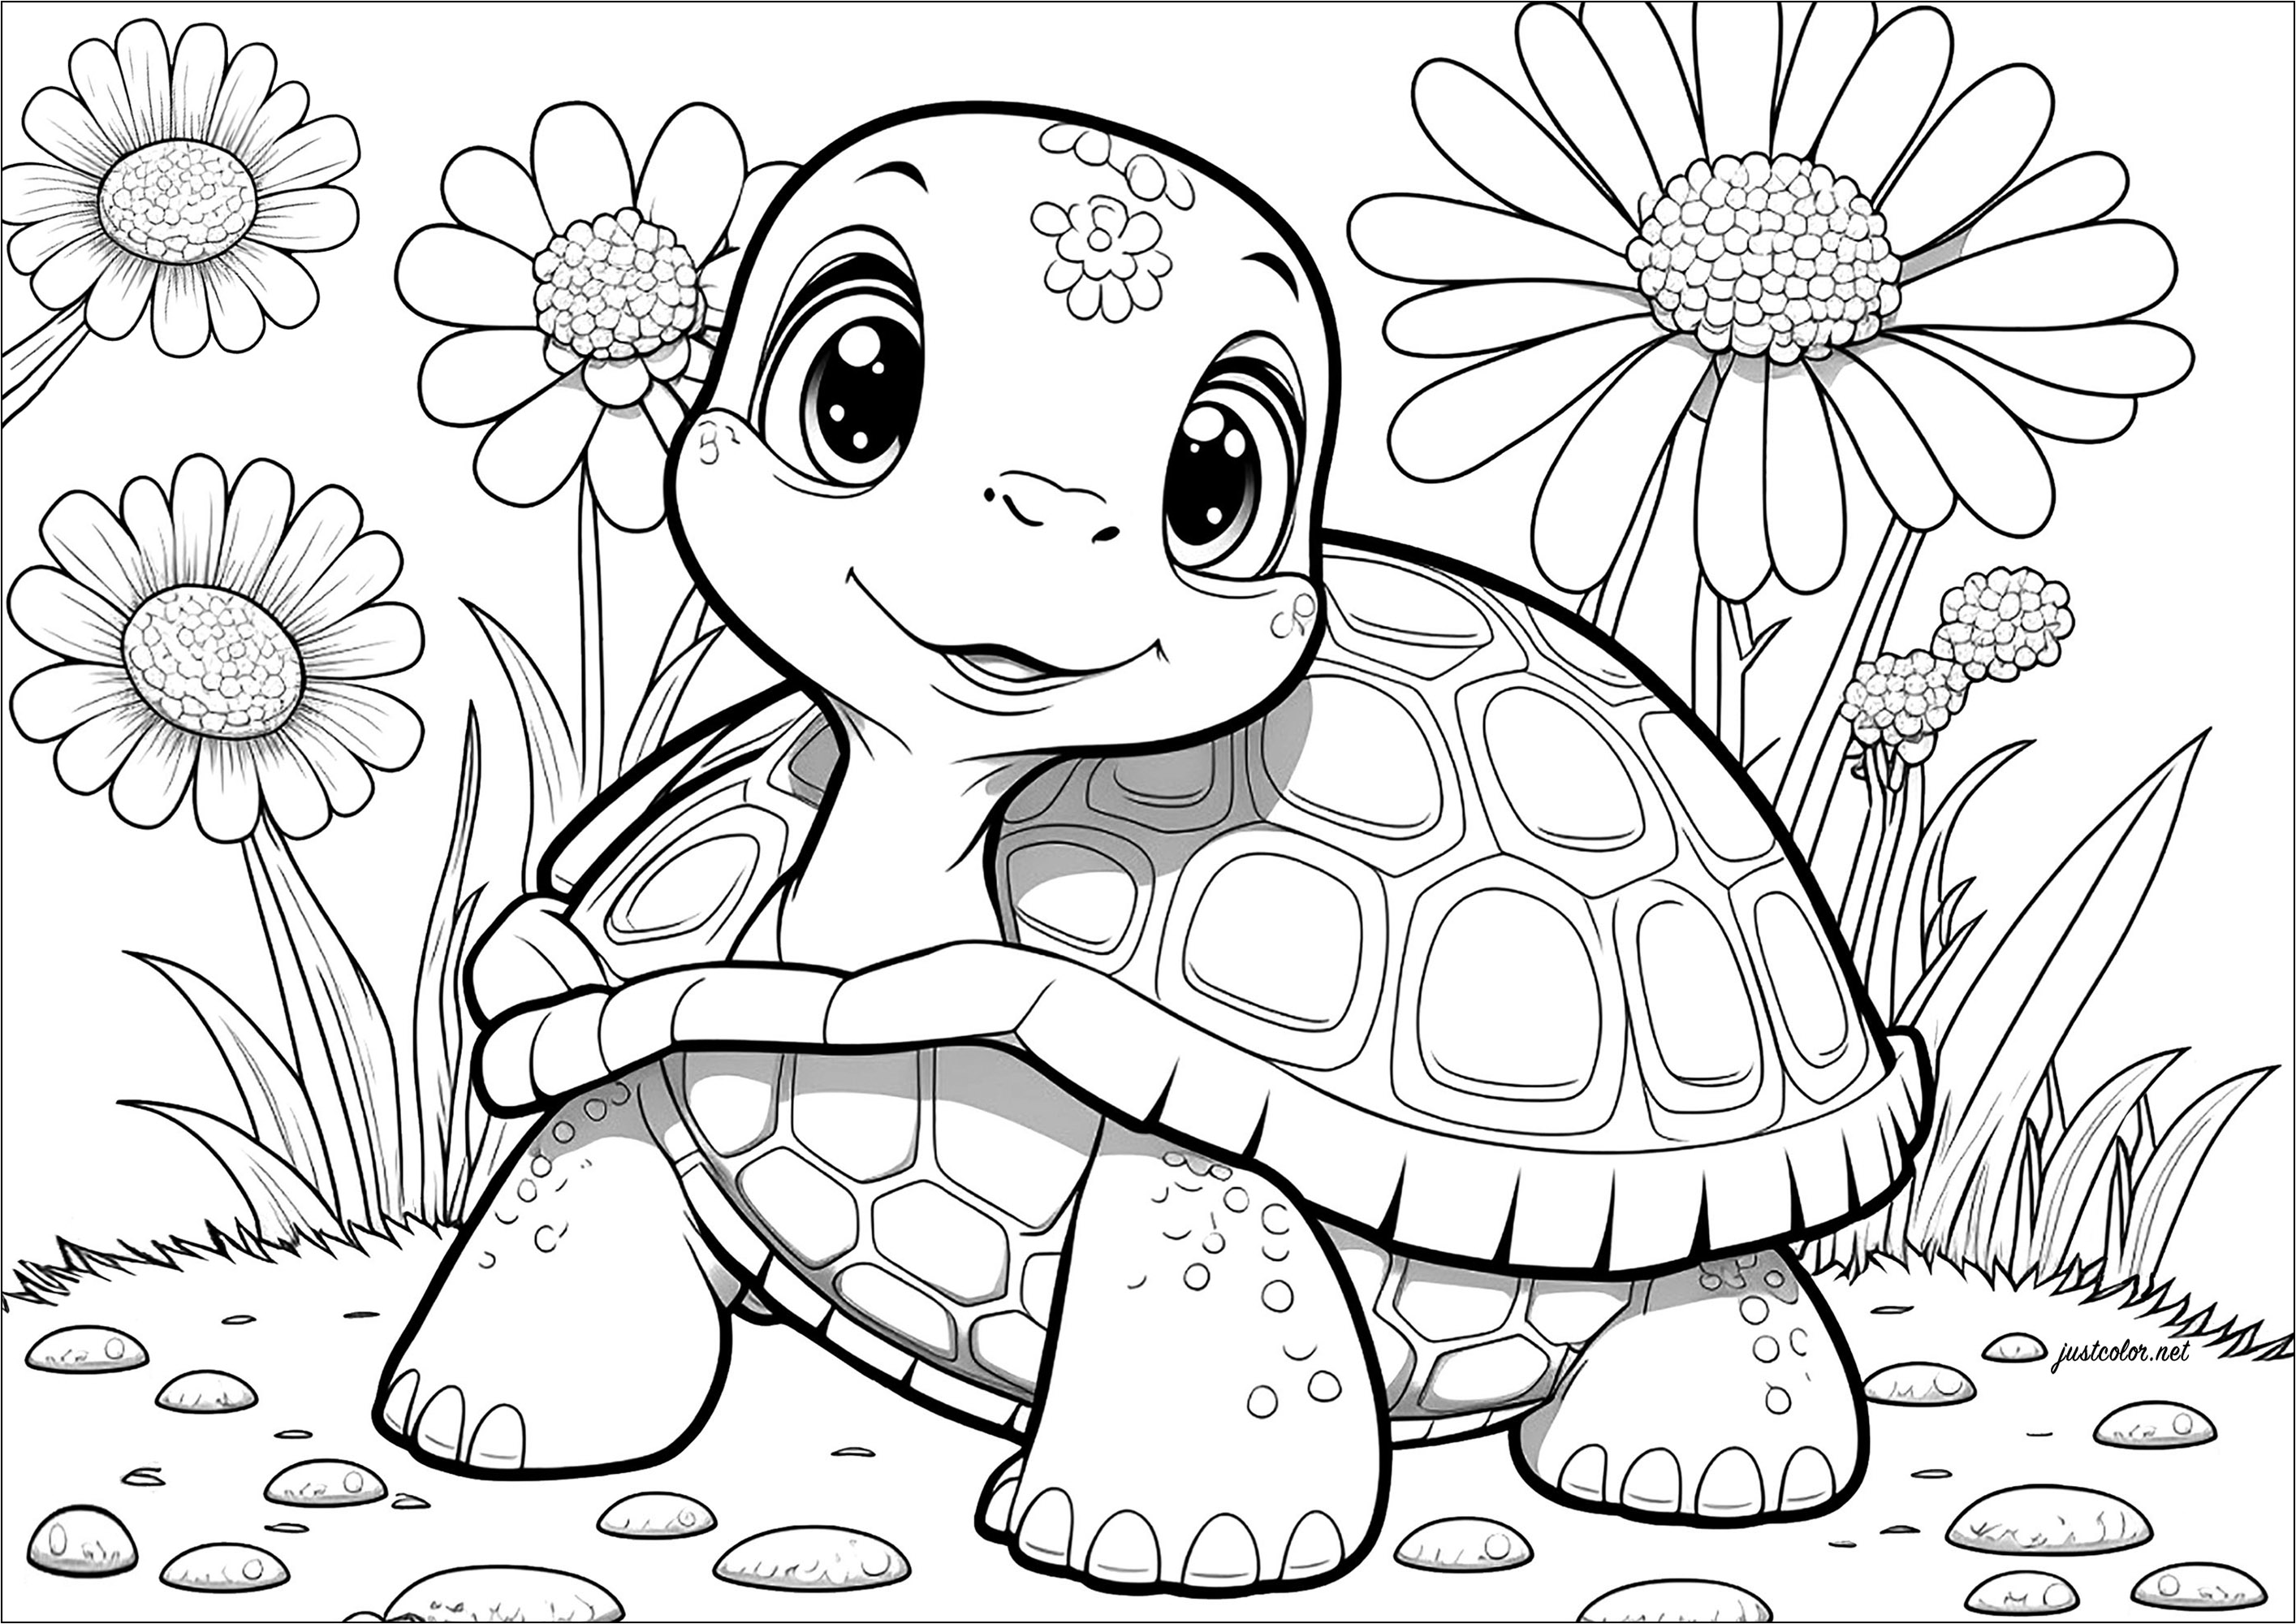 A very childlike turtle to color, but with lots of detail!. Follow this earth turtle on his slow but sure adventures in this fun coloring page.